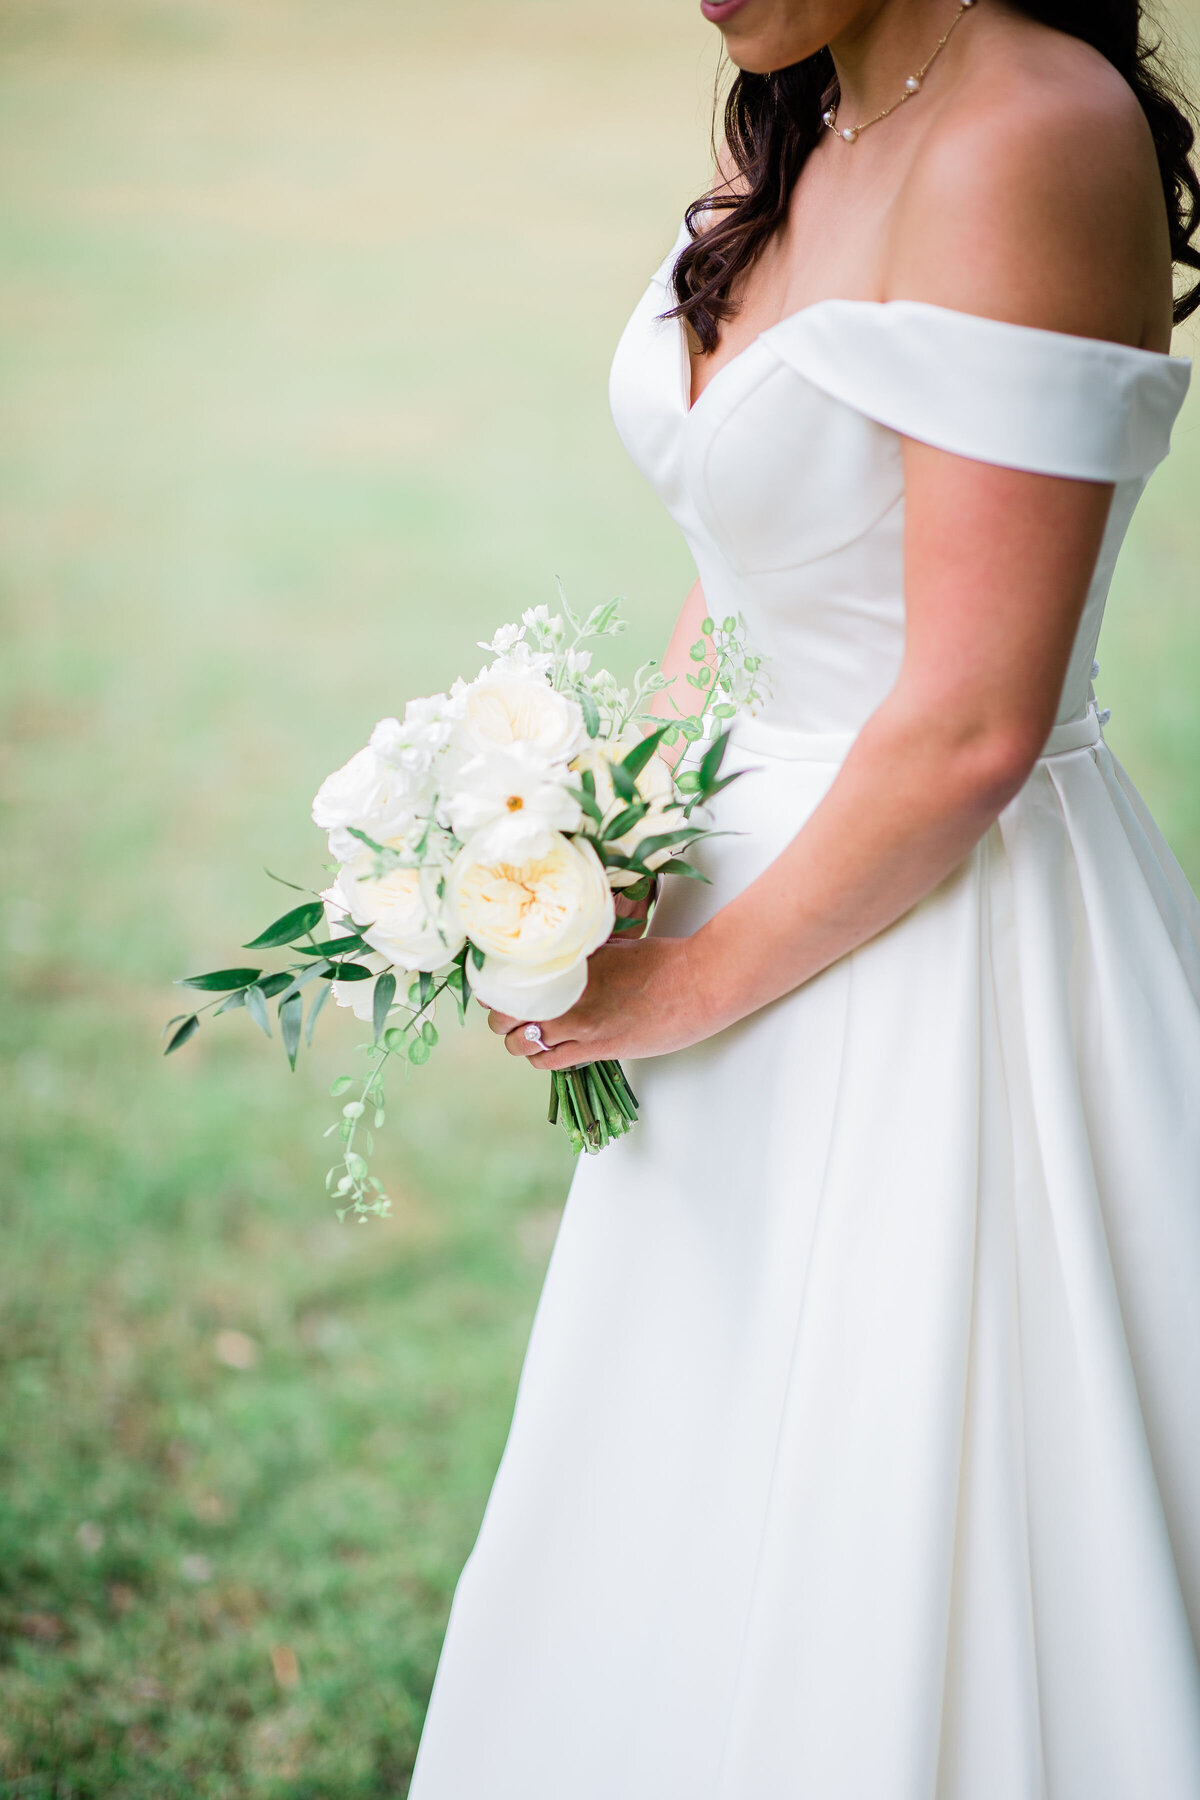 graceful bride with magnificent wedding bouquet The Georges